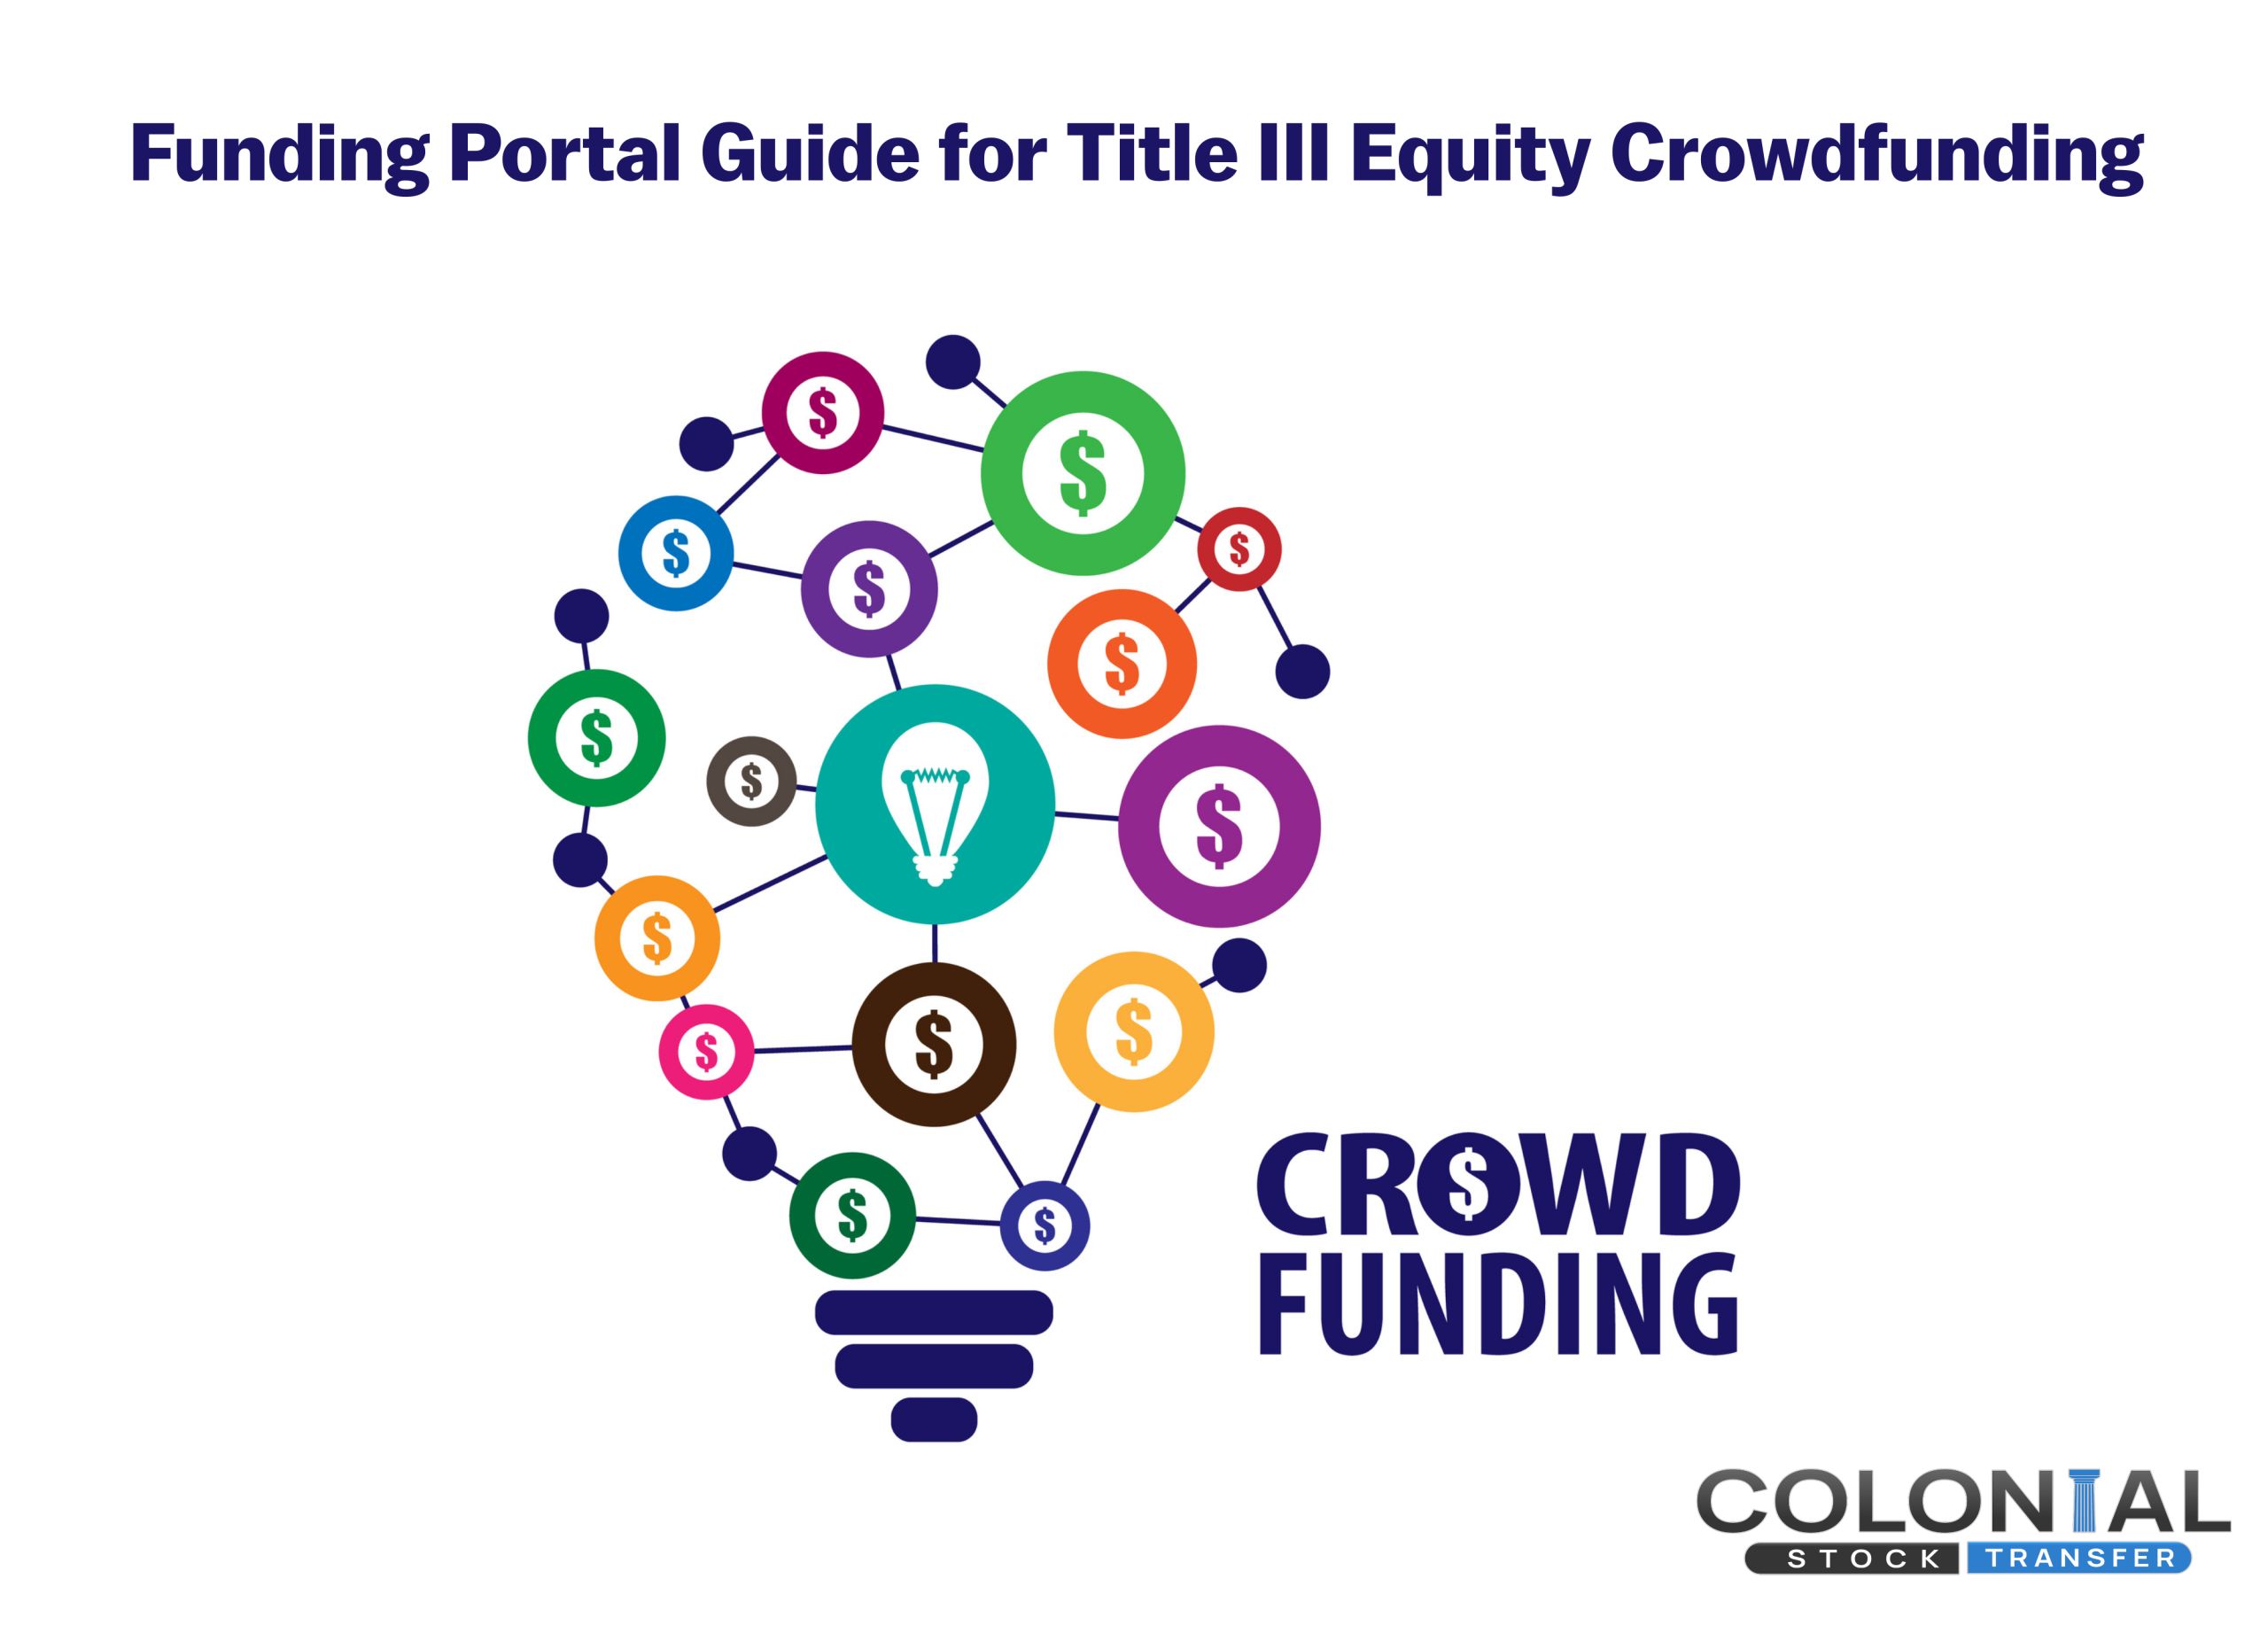 Funding Portal Guide for Title III Equity Crowdfunding